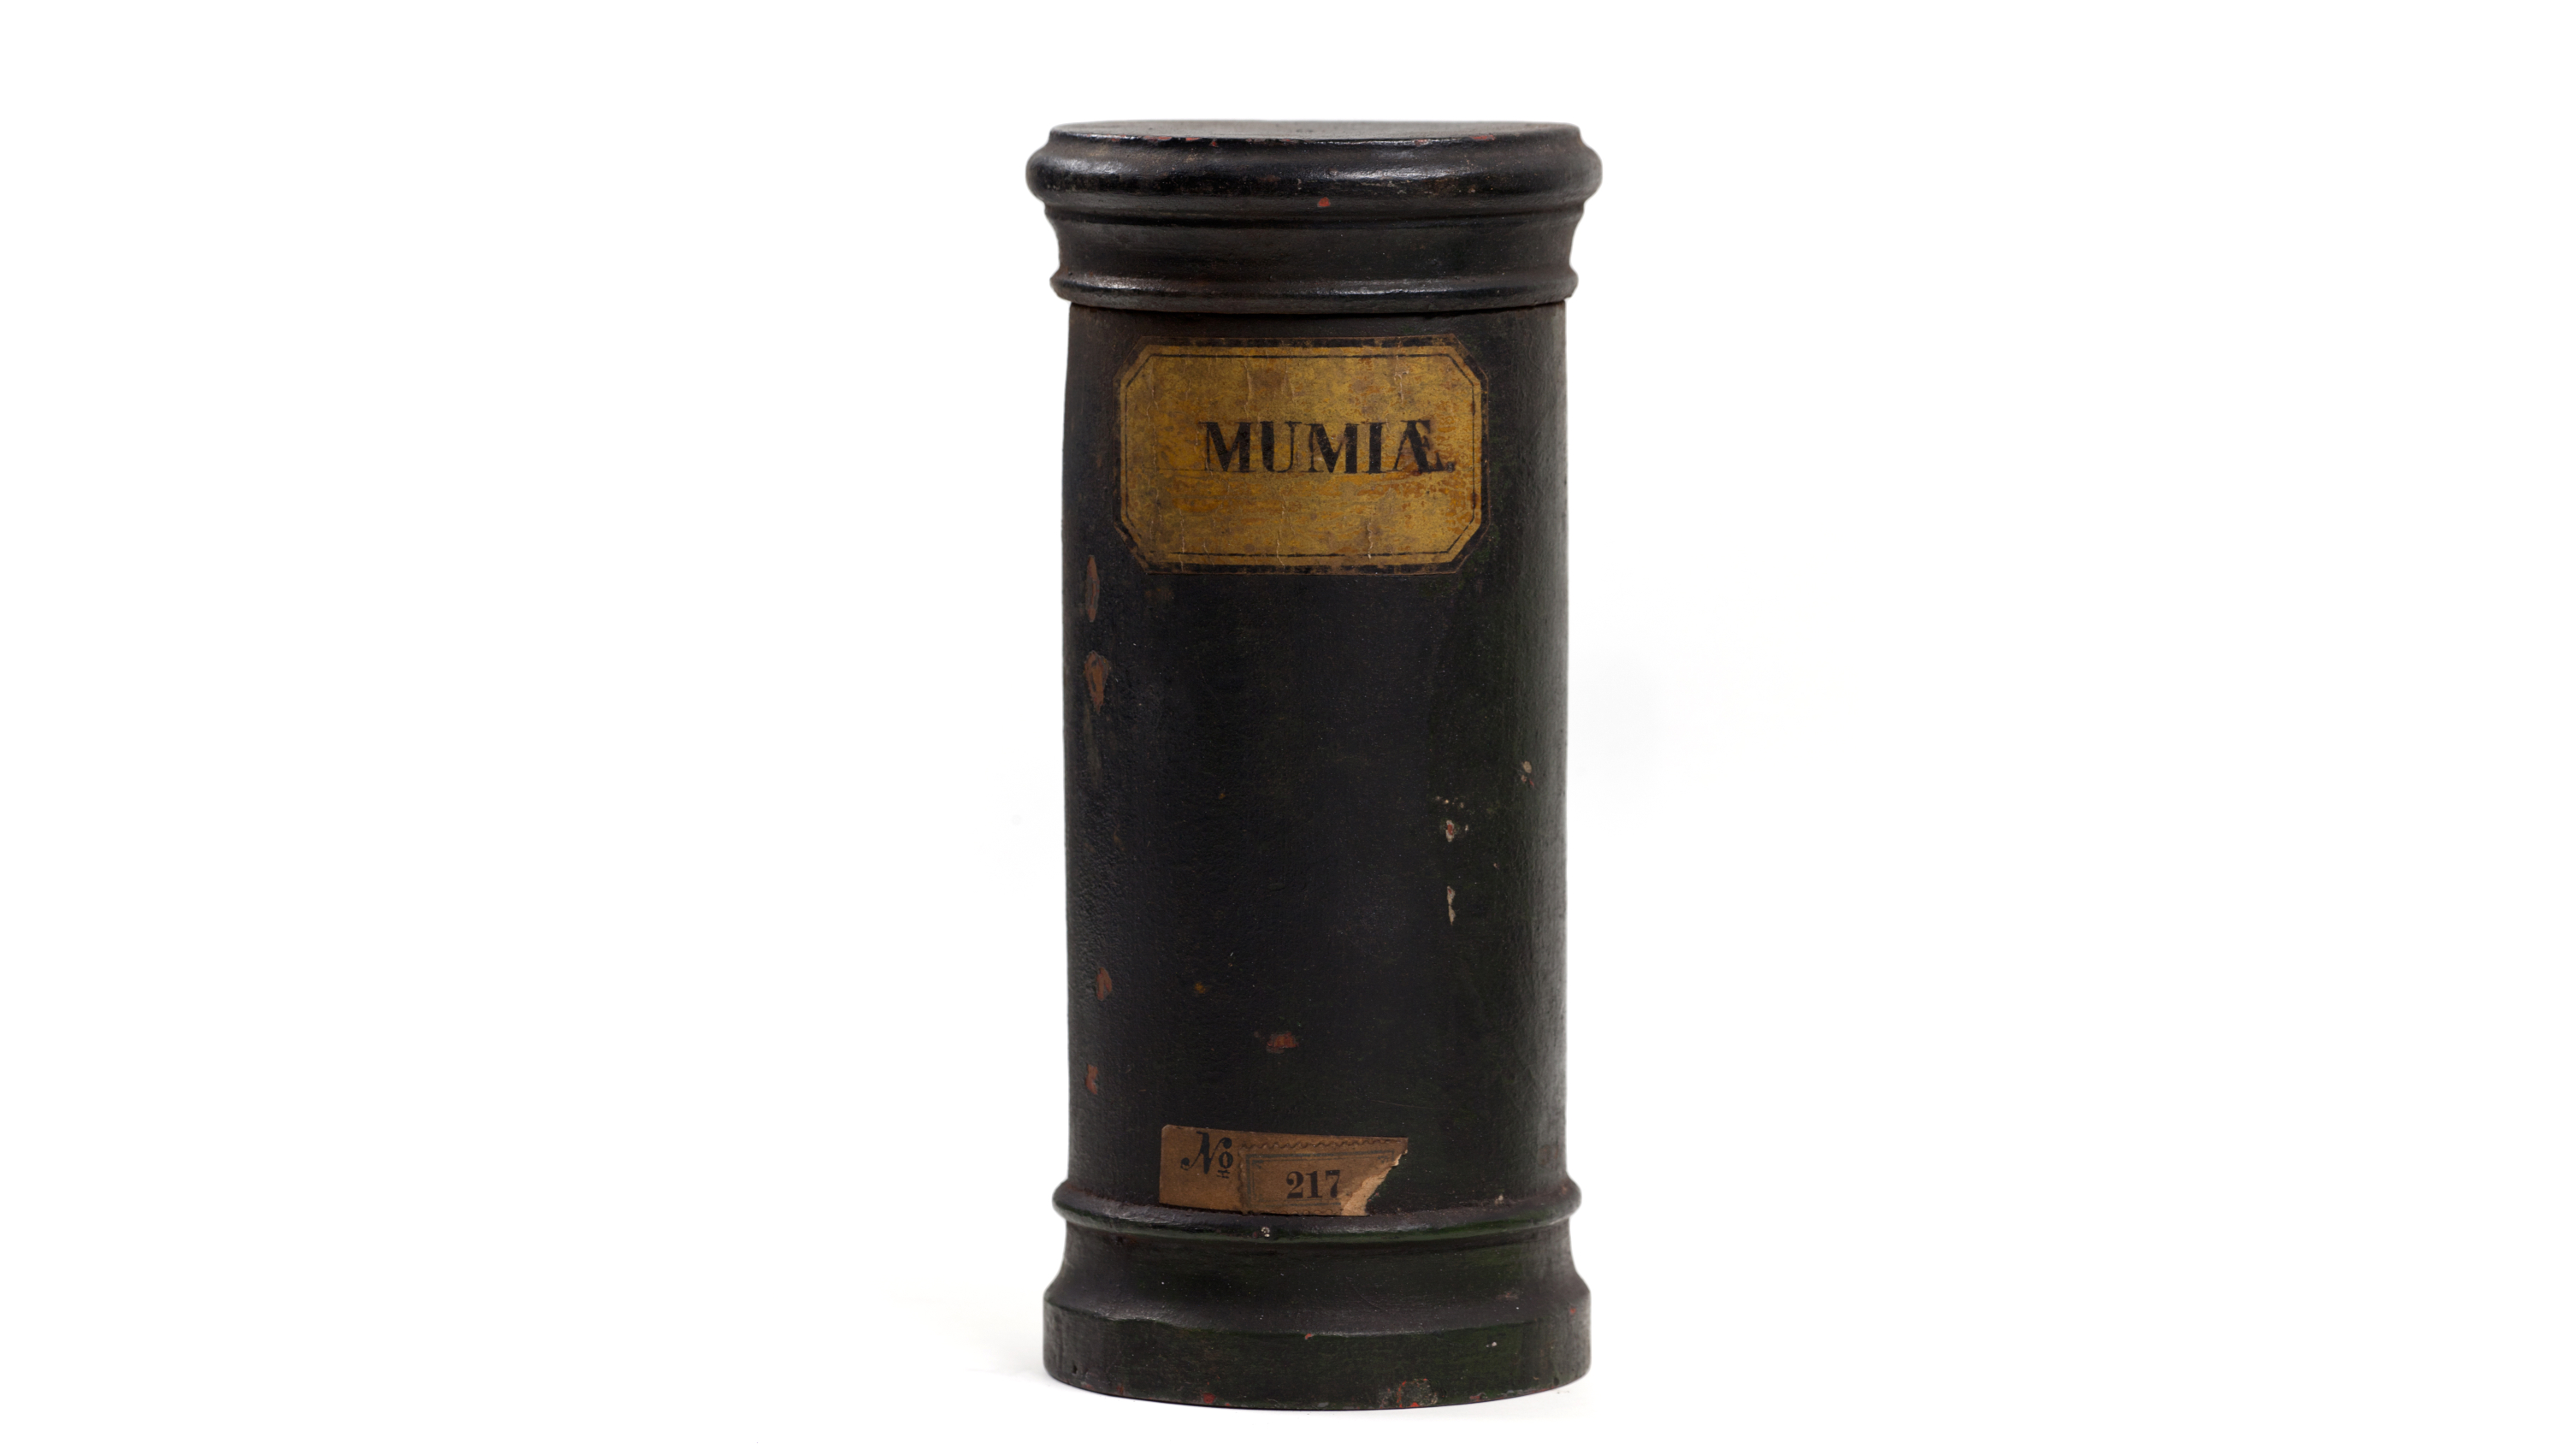 A container of mumia, from the Museum for Hamburg History